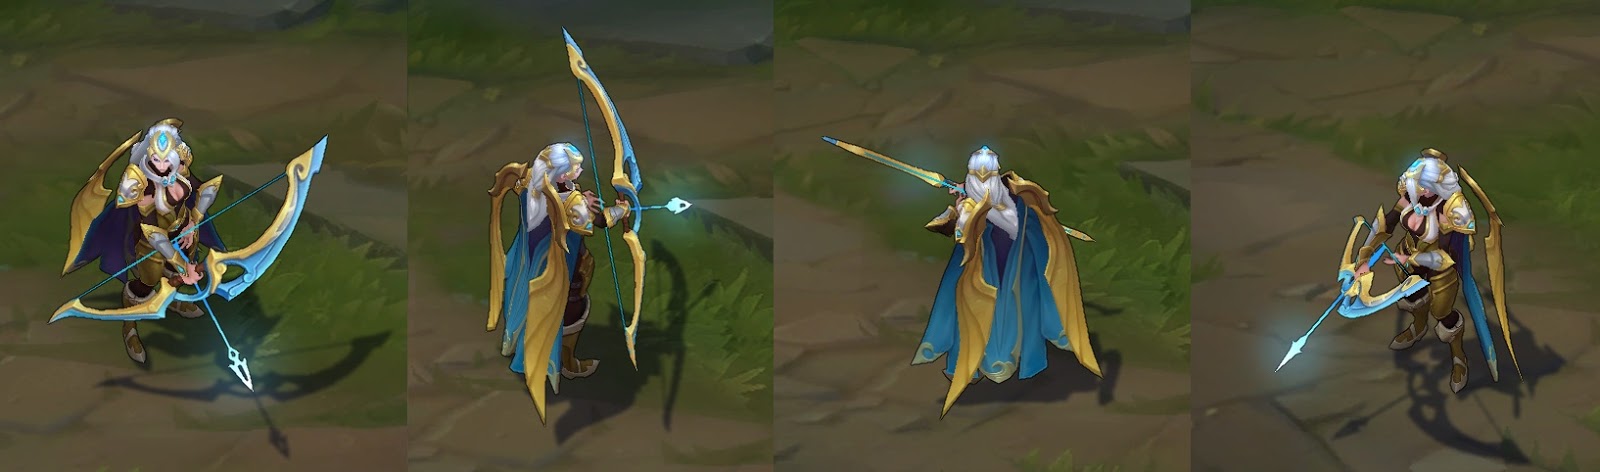 Championship Ashe chroma skin  pack for league of legends ingame picture